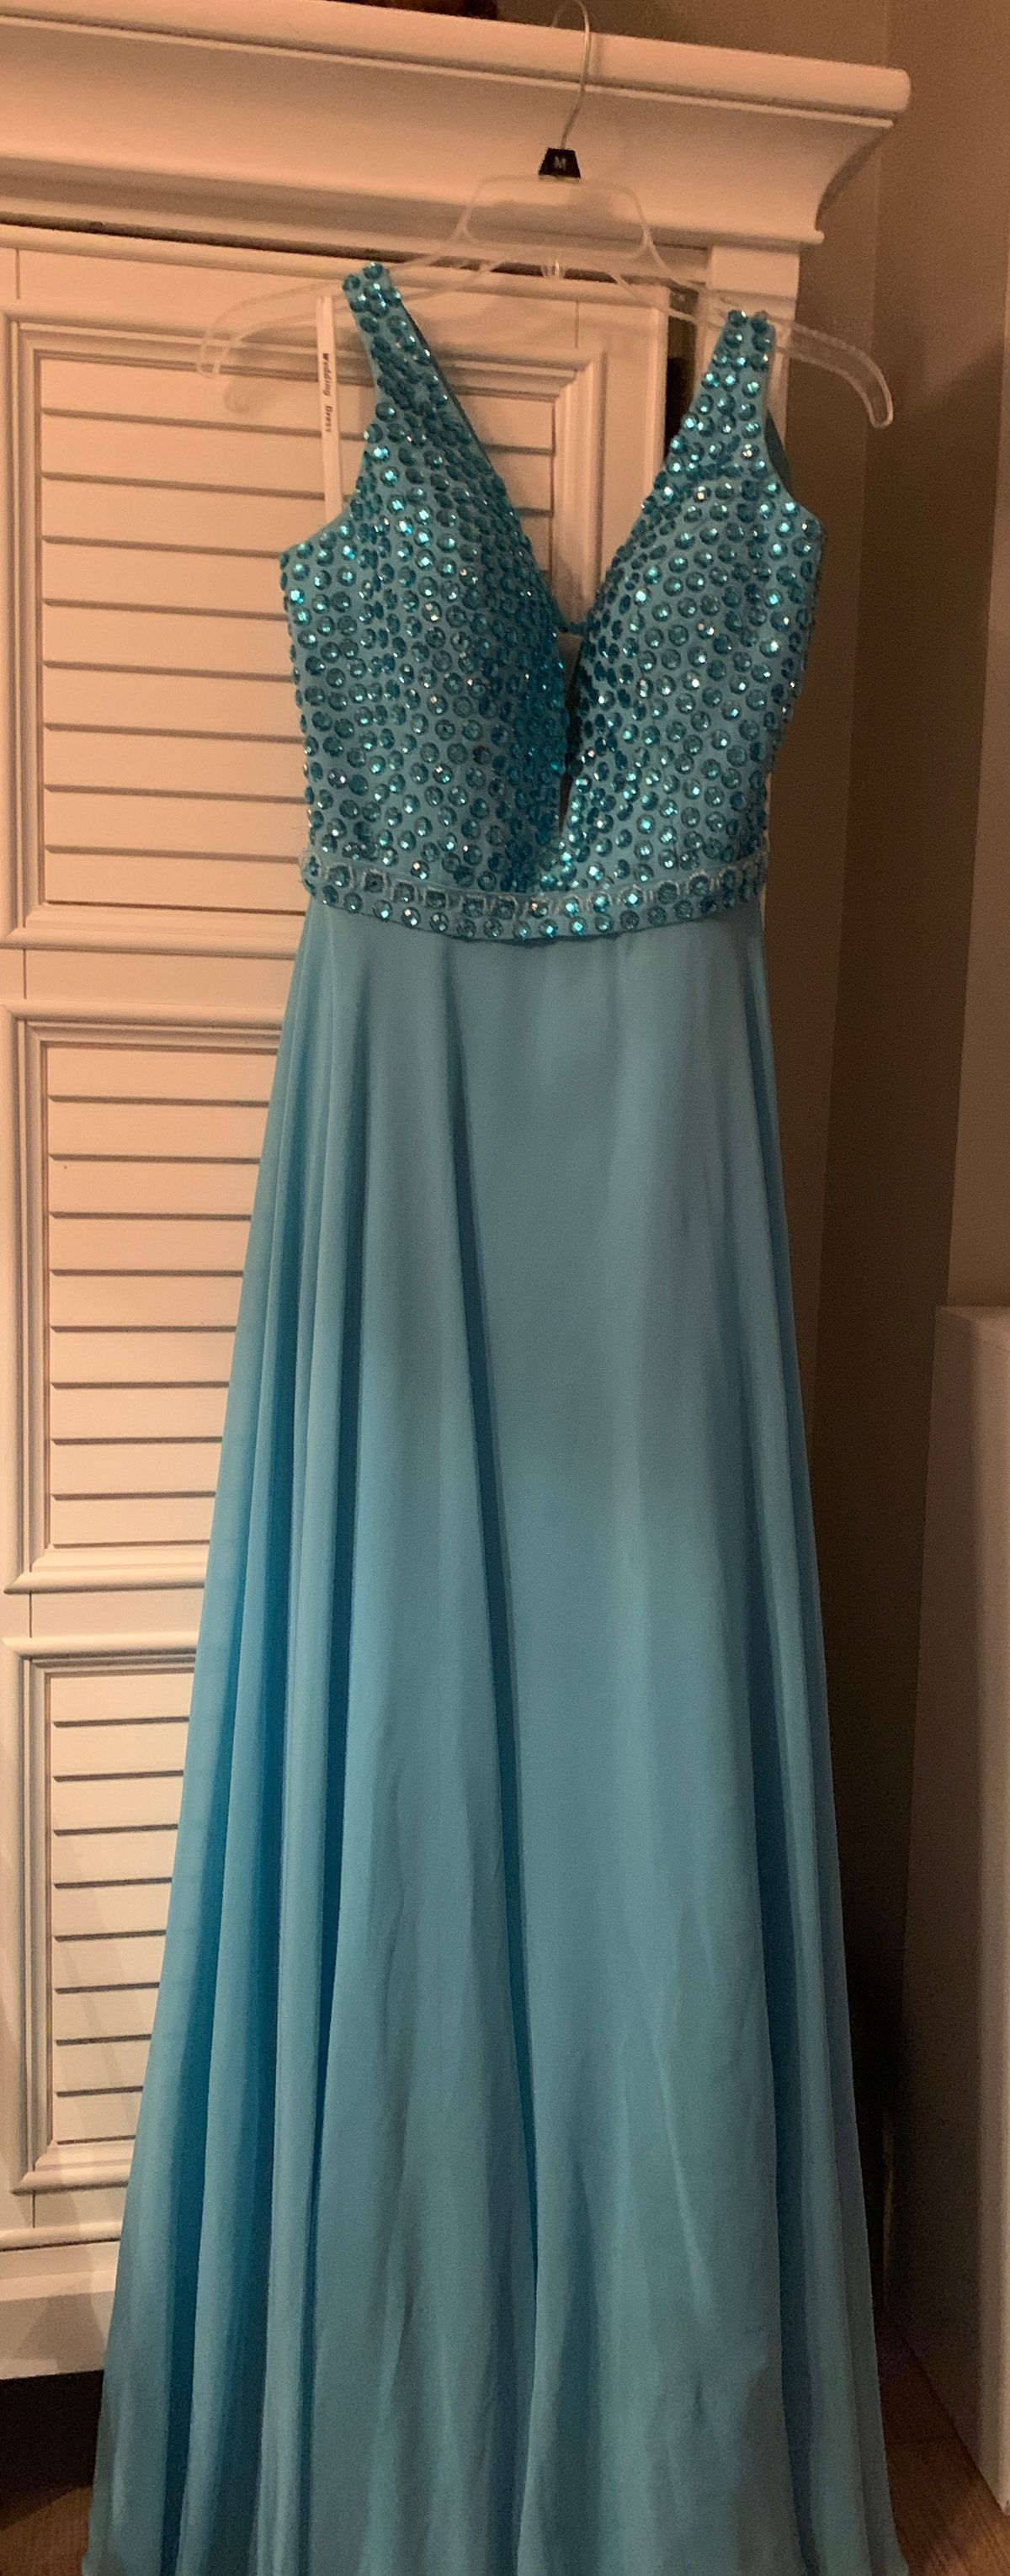 Wedding Dress Size 6 Prom Turquoise Blue A-line Dress on Queenly